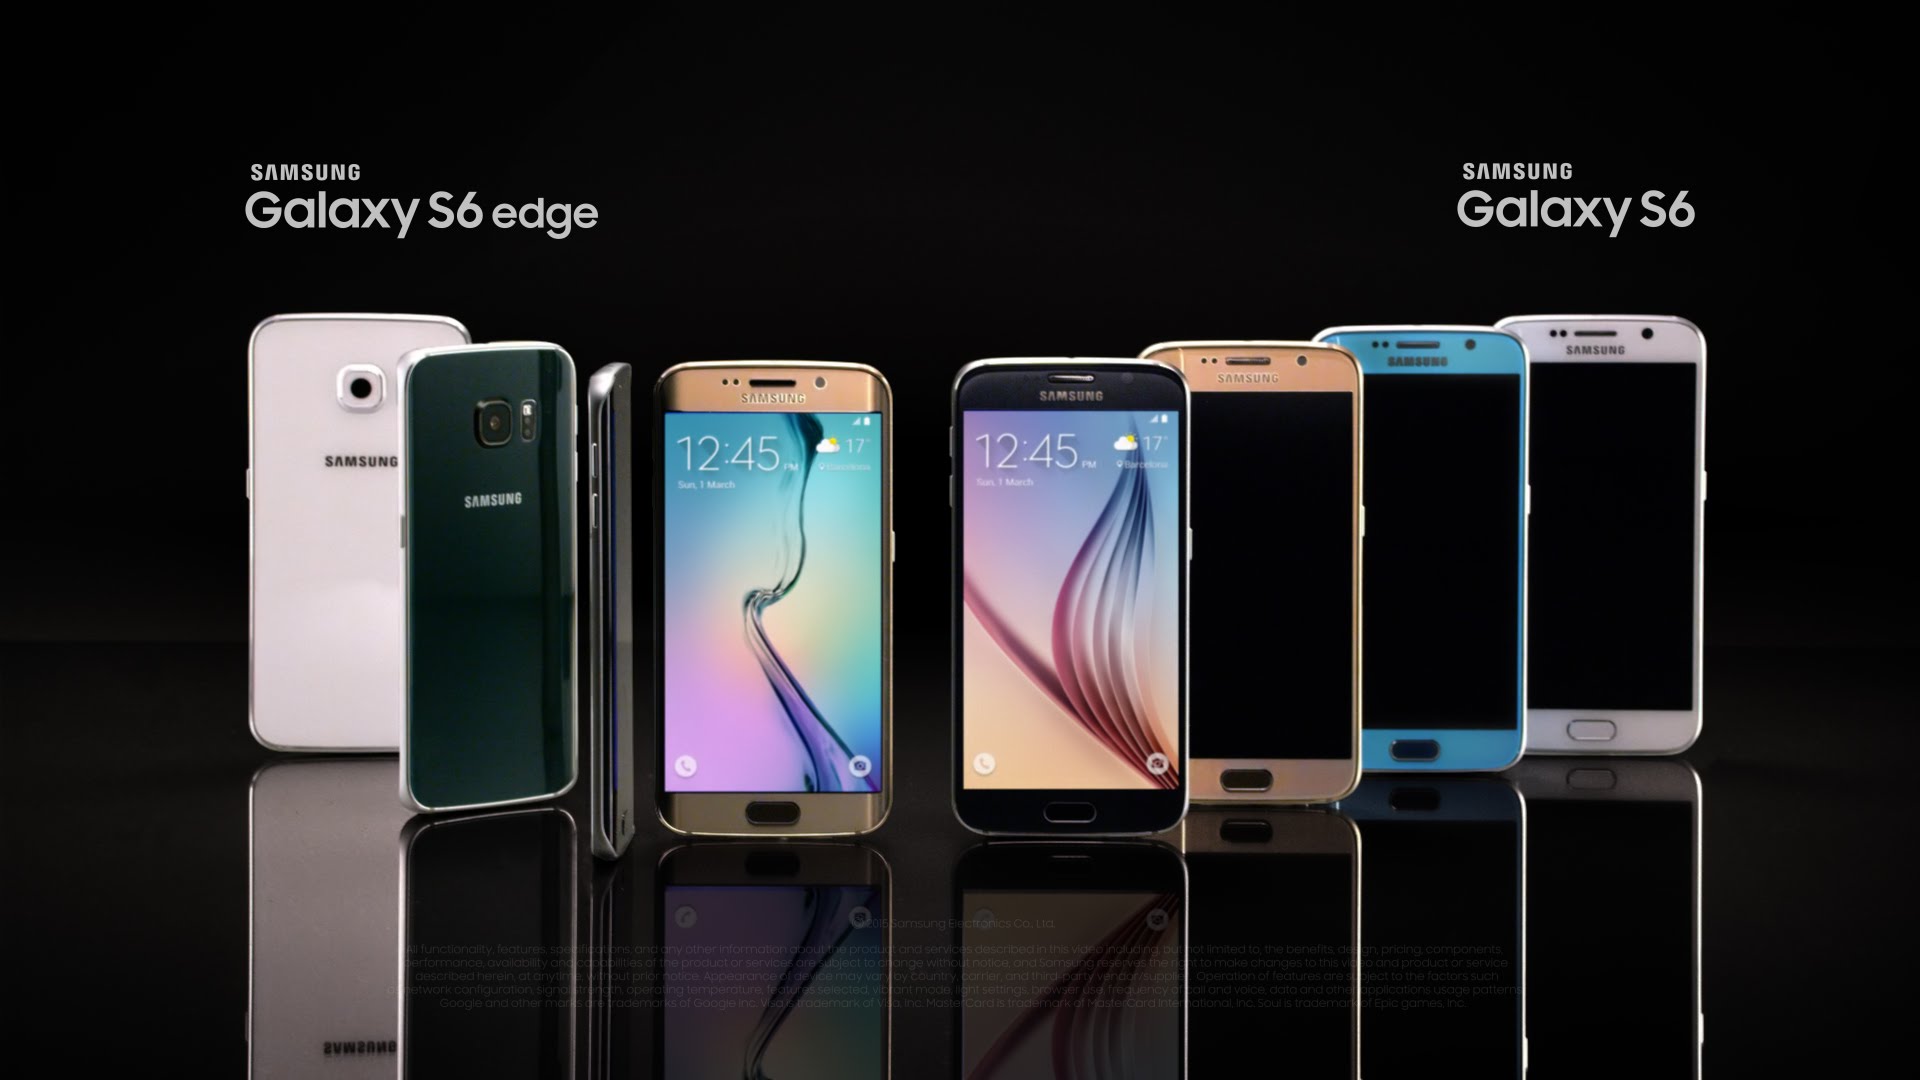 samsung galaxy s6 edge wallpaper,mobile phone,gadget,smartphone,communication device,portable communications device